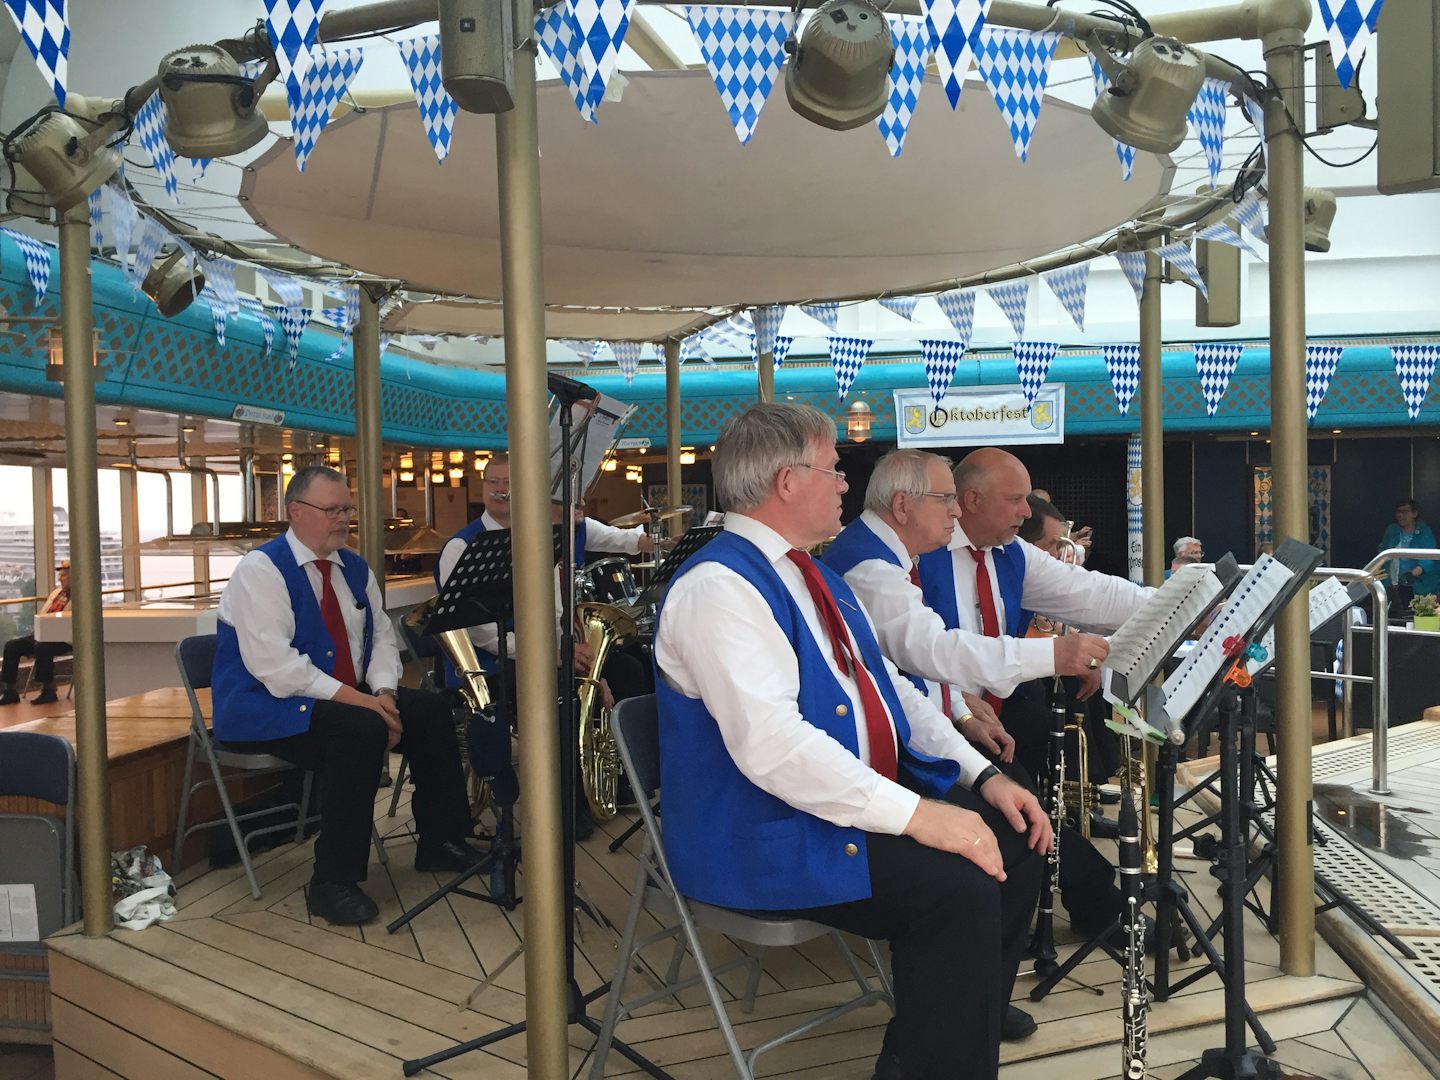 Local German band came onboard while we were in German port.